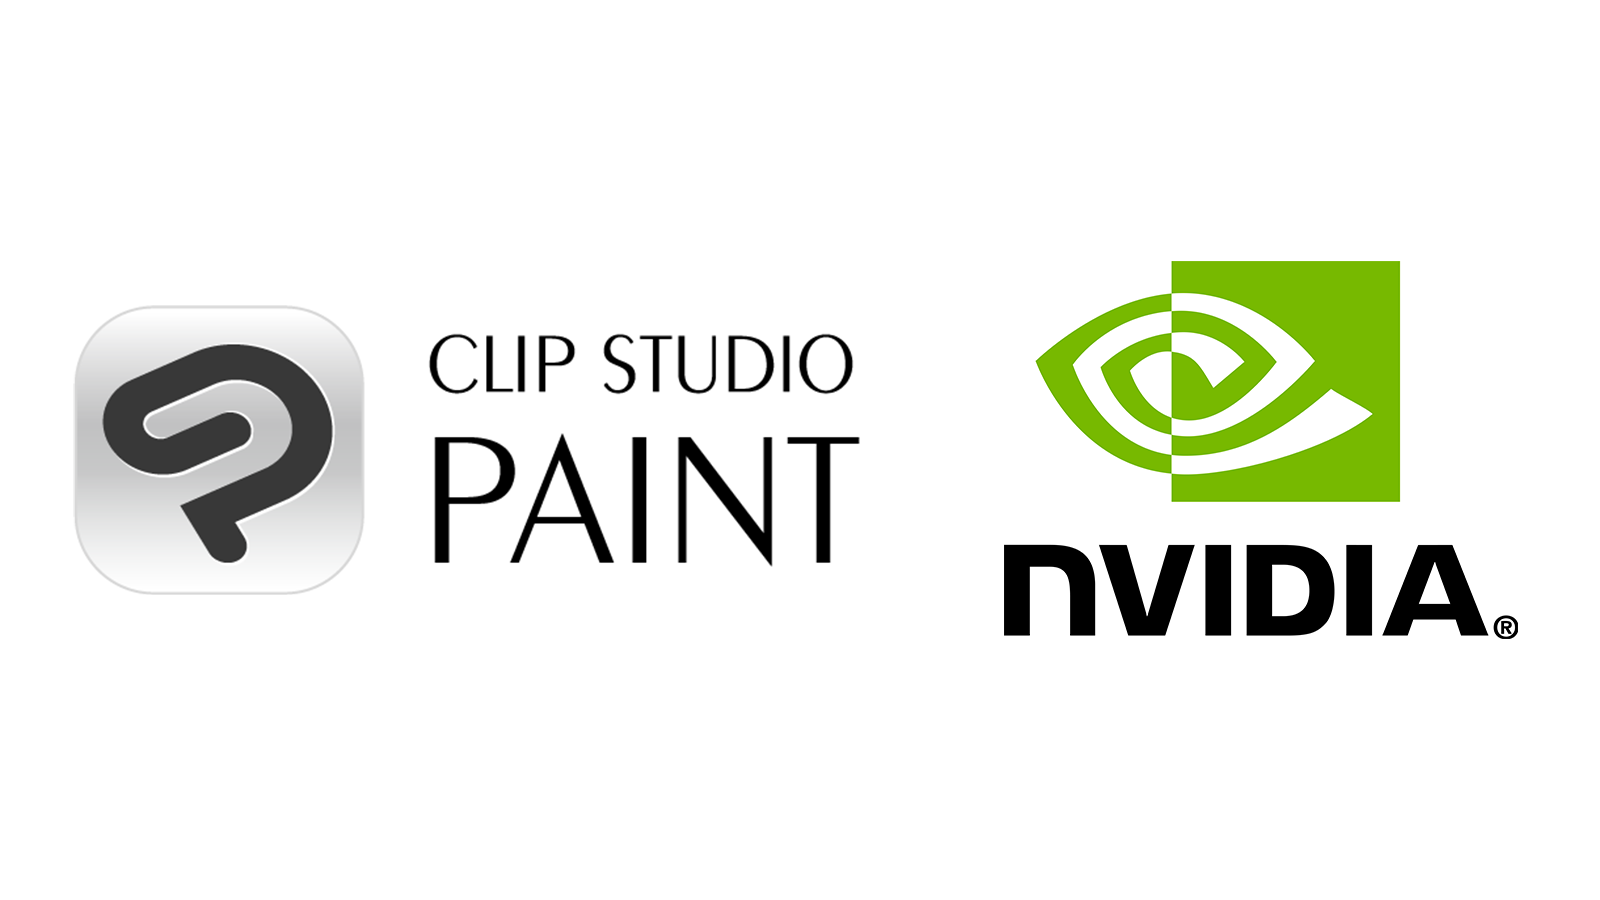 Clip Studio Paint added to NVIDIA’s Accelerated Apps Catalog  for accelerated use of GPU platform